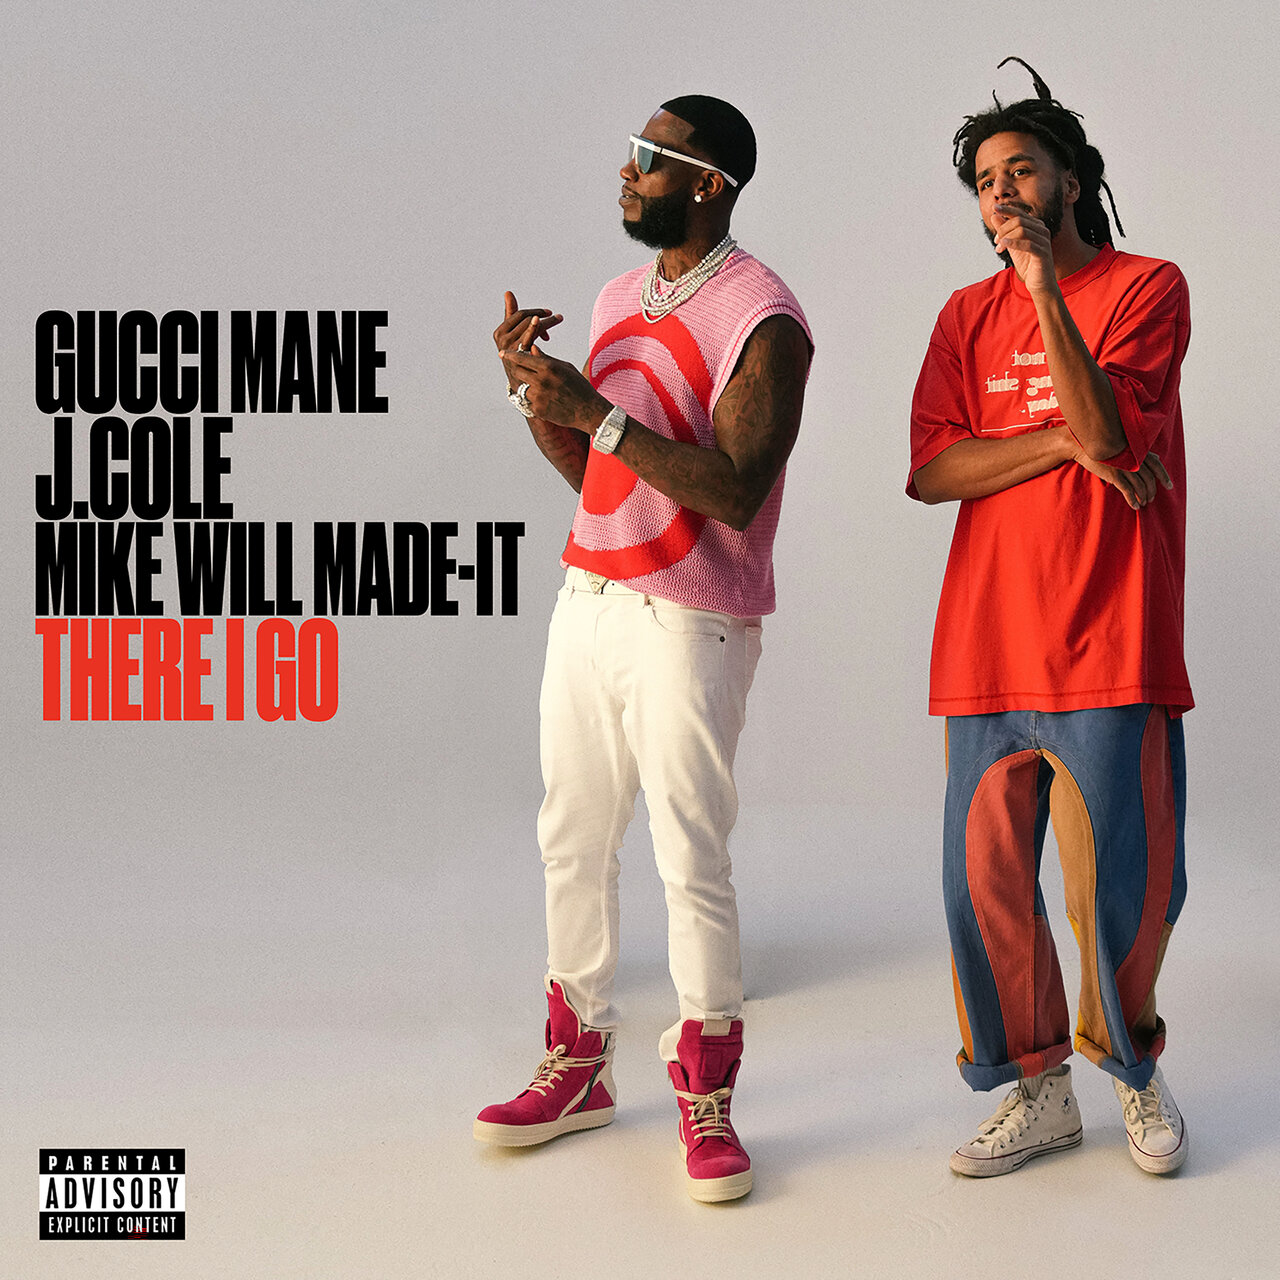 Gucci Mane - There I Go (ft. J. Cole and Mike Will Made-It) (Cover)